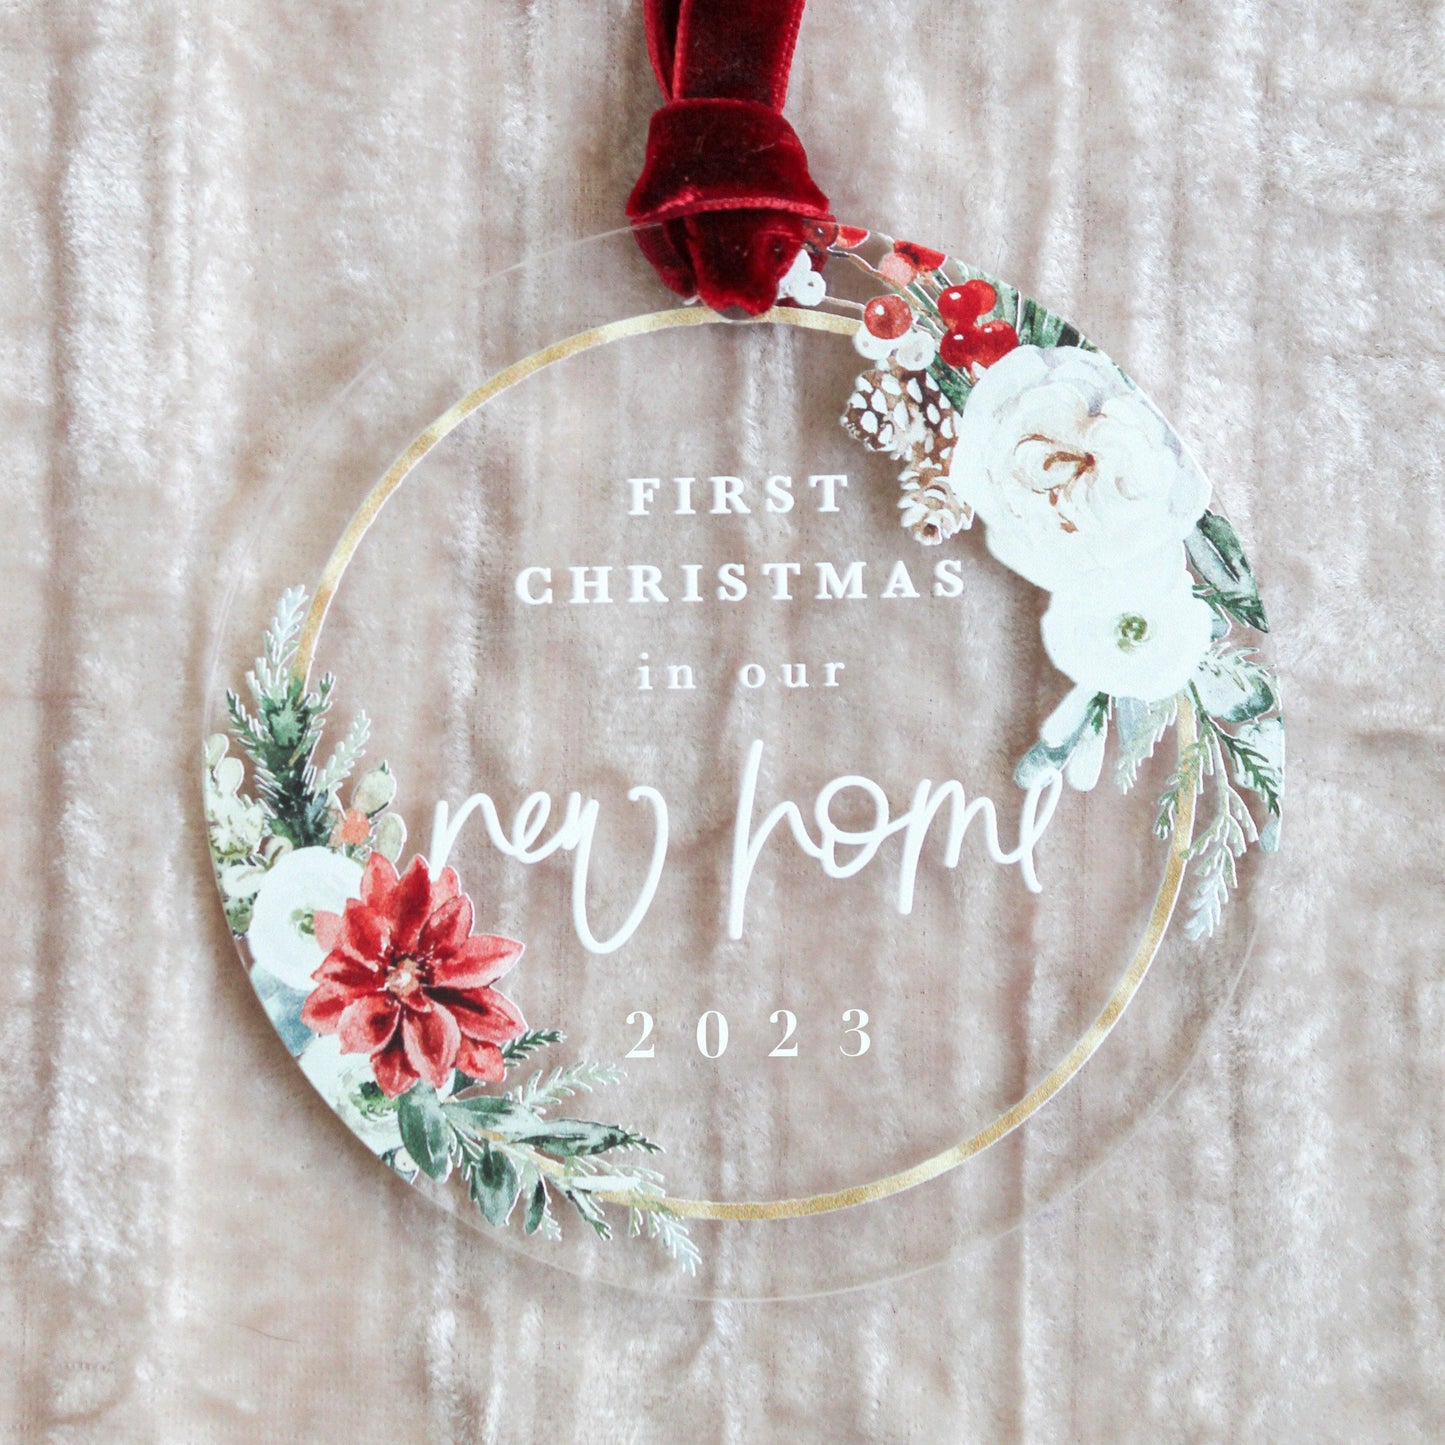 First Christmas in our New Home 2023 Ornament - Plum Grove Design